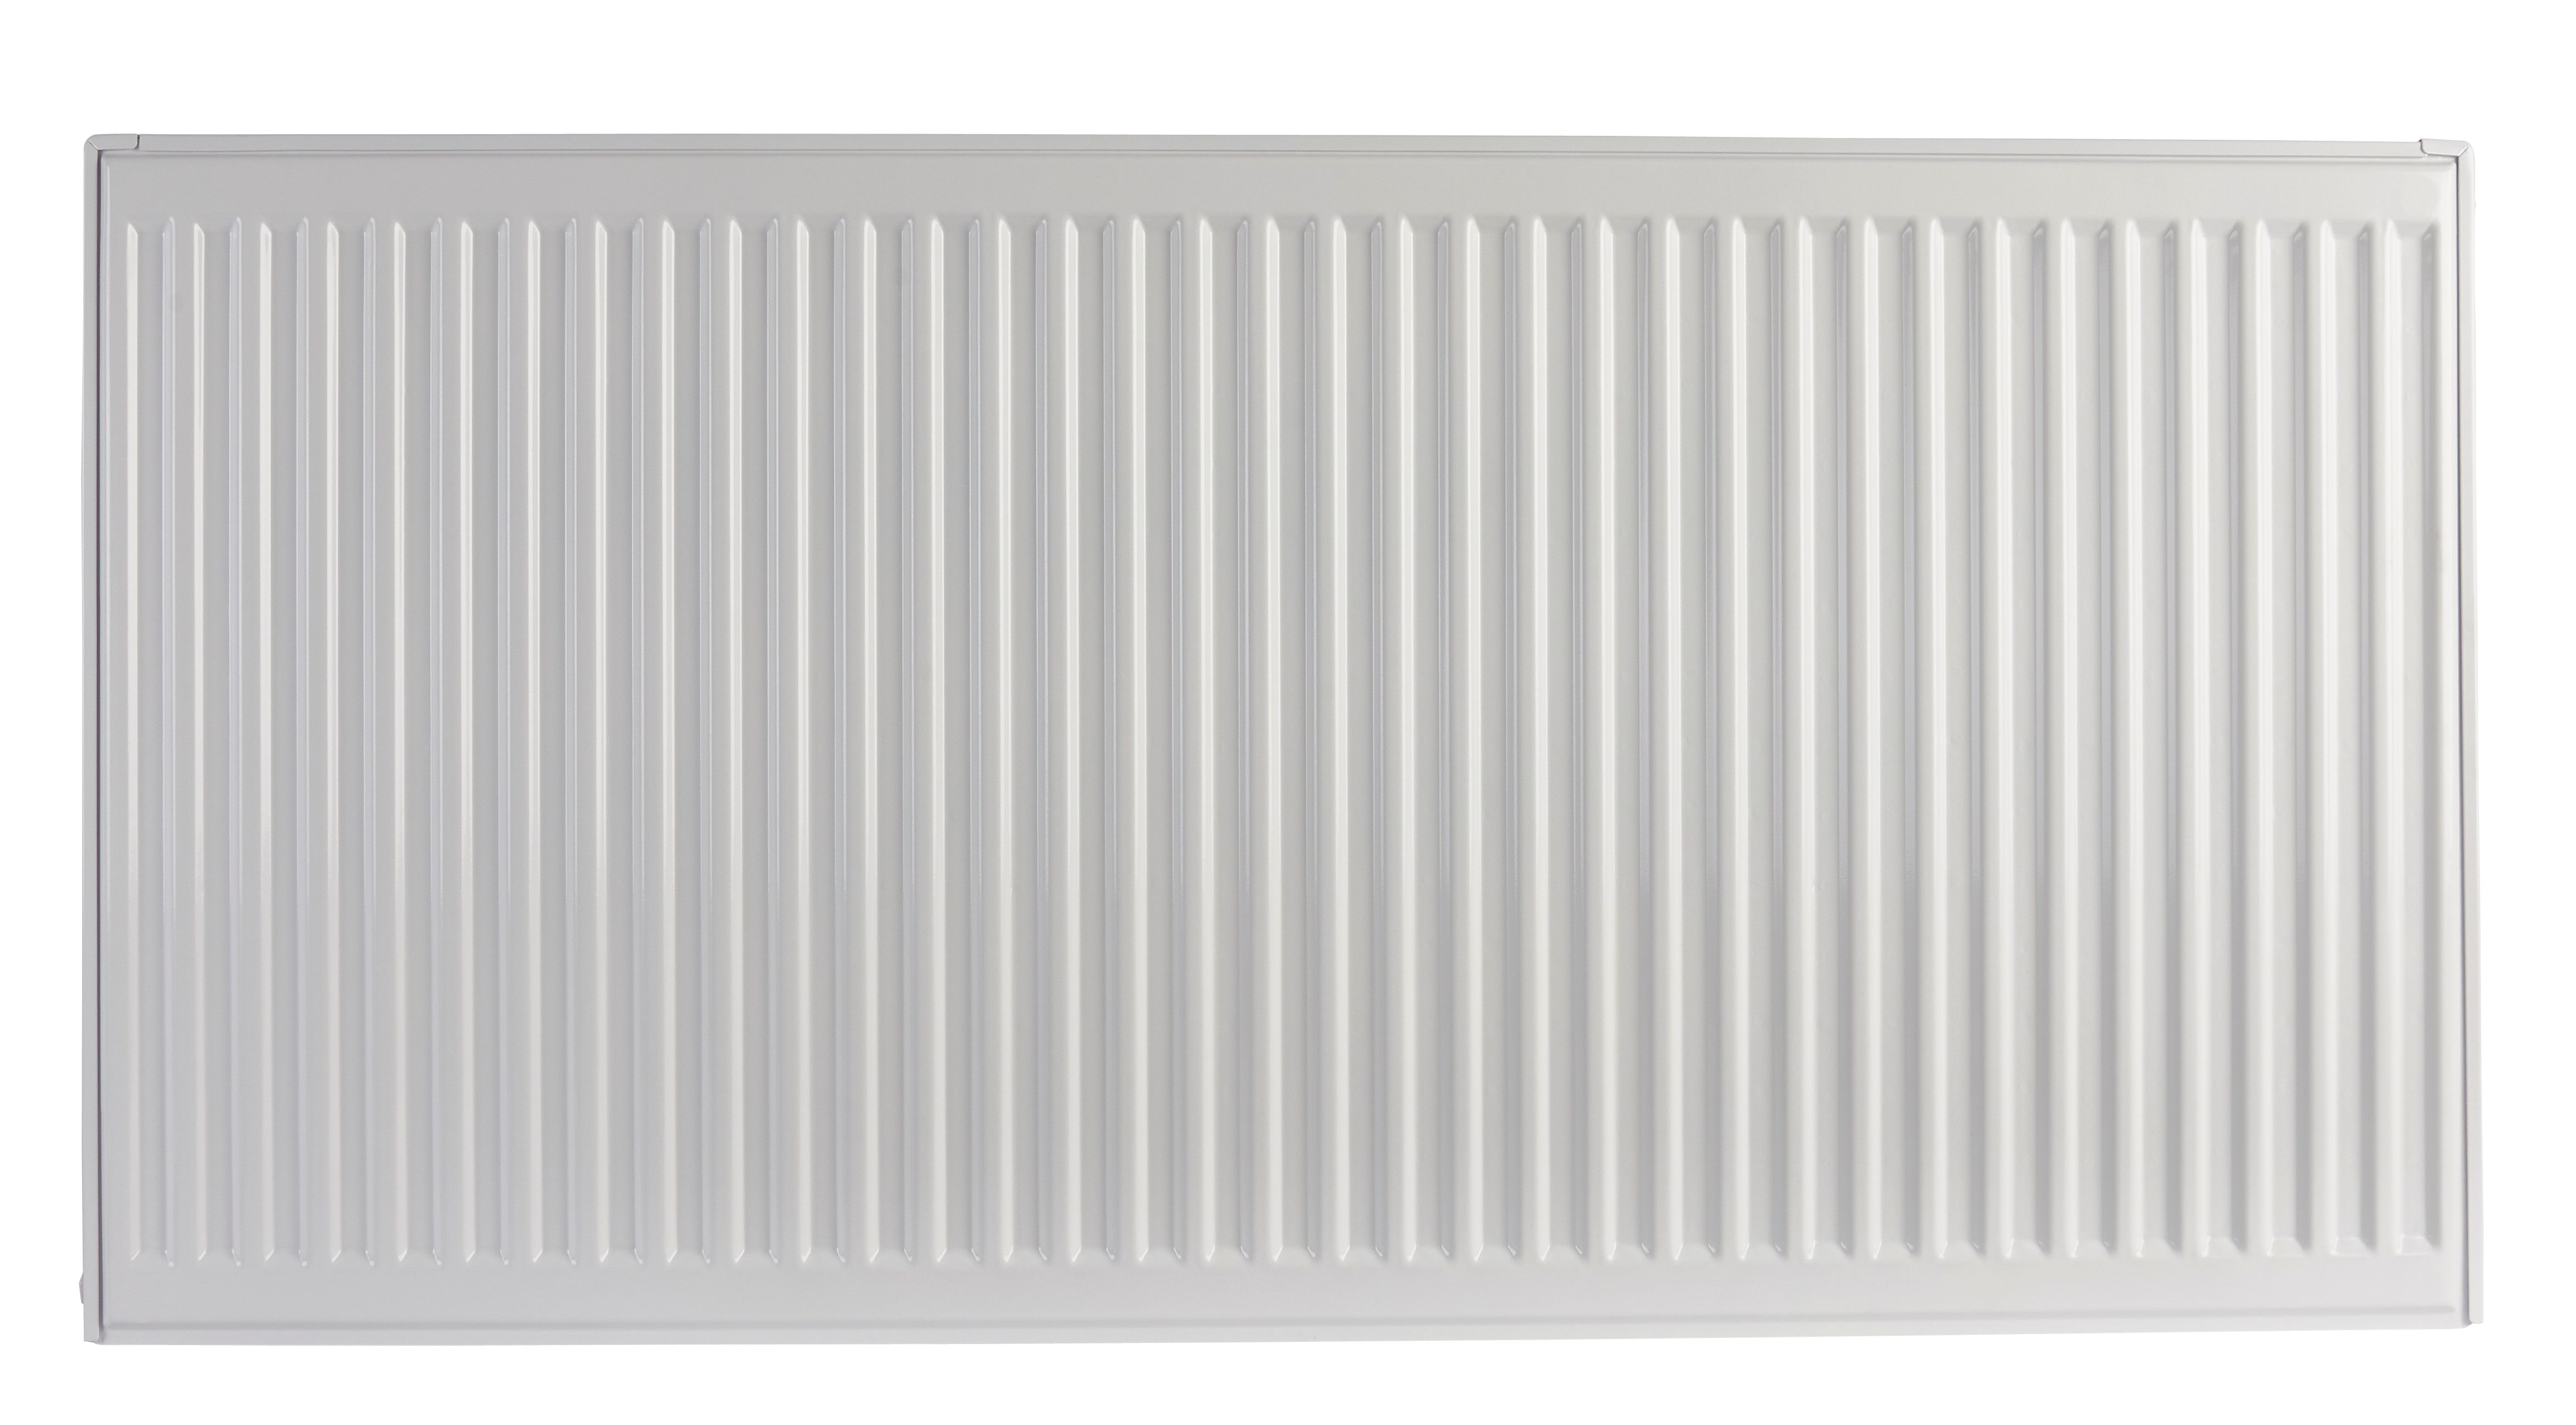 Image of Homeline by Stelrad 600 x 1400mm Type 22 Double Panel Premium Double Convector Radiator